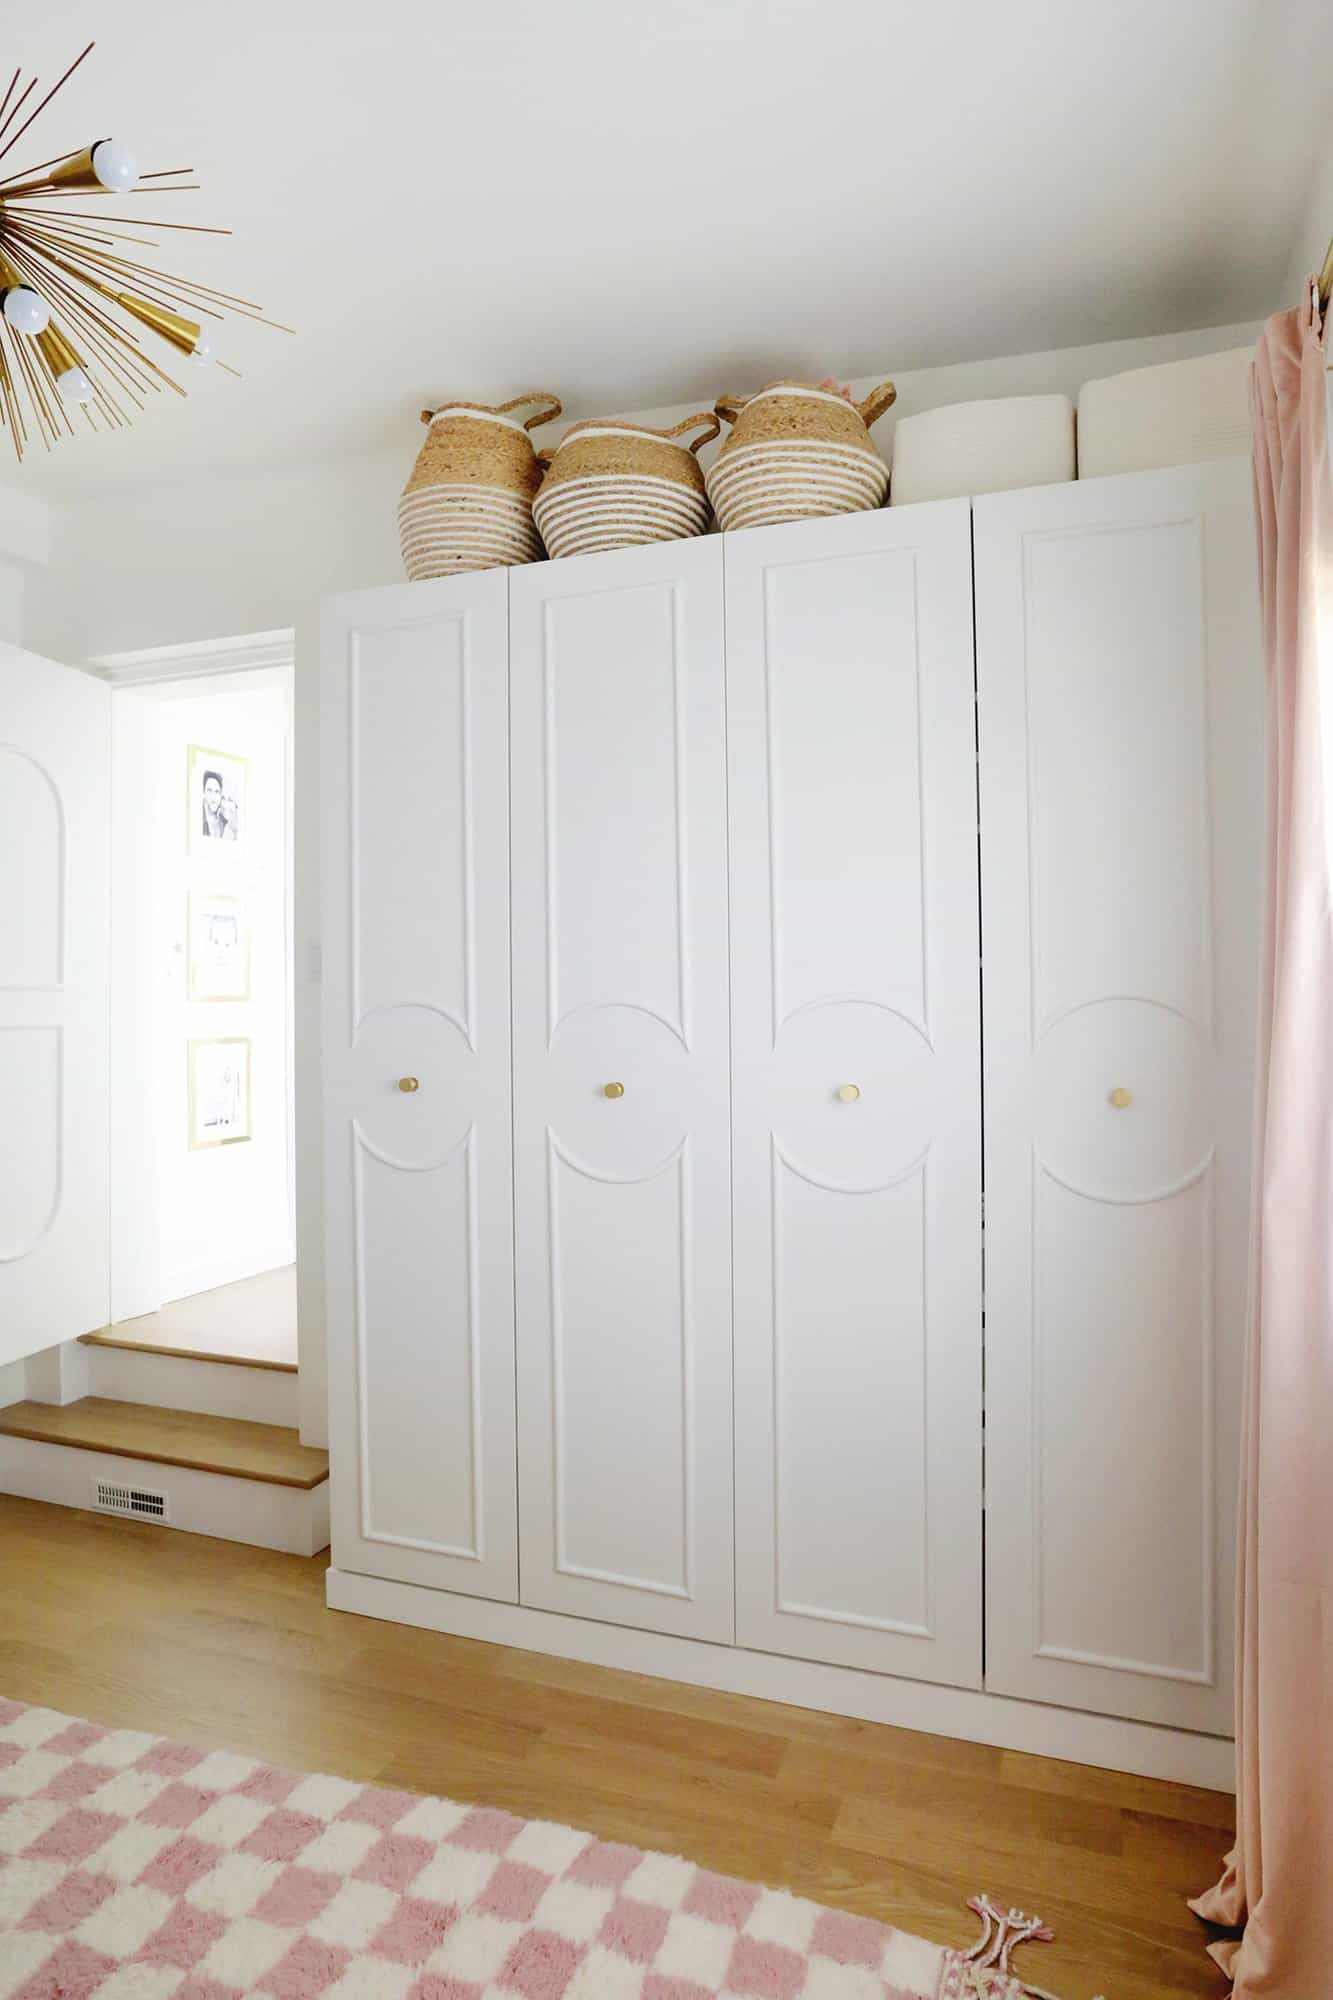 Easy Hack to Build In an Ikea Pax Wardrobe click through for more 1 3